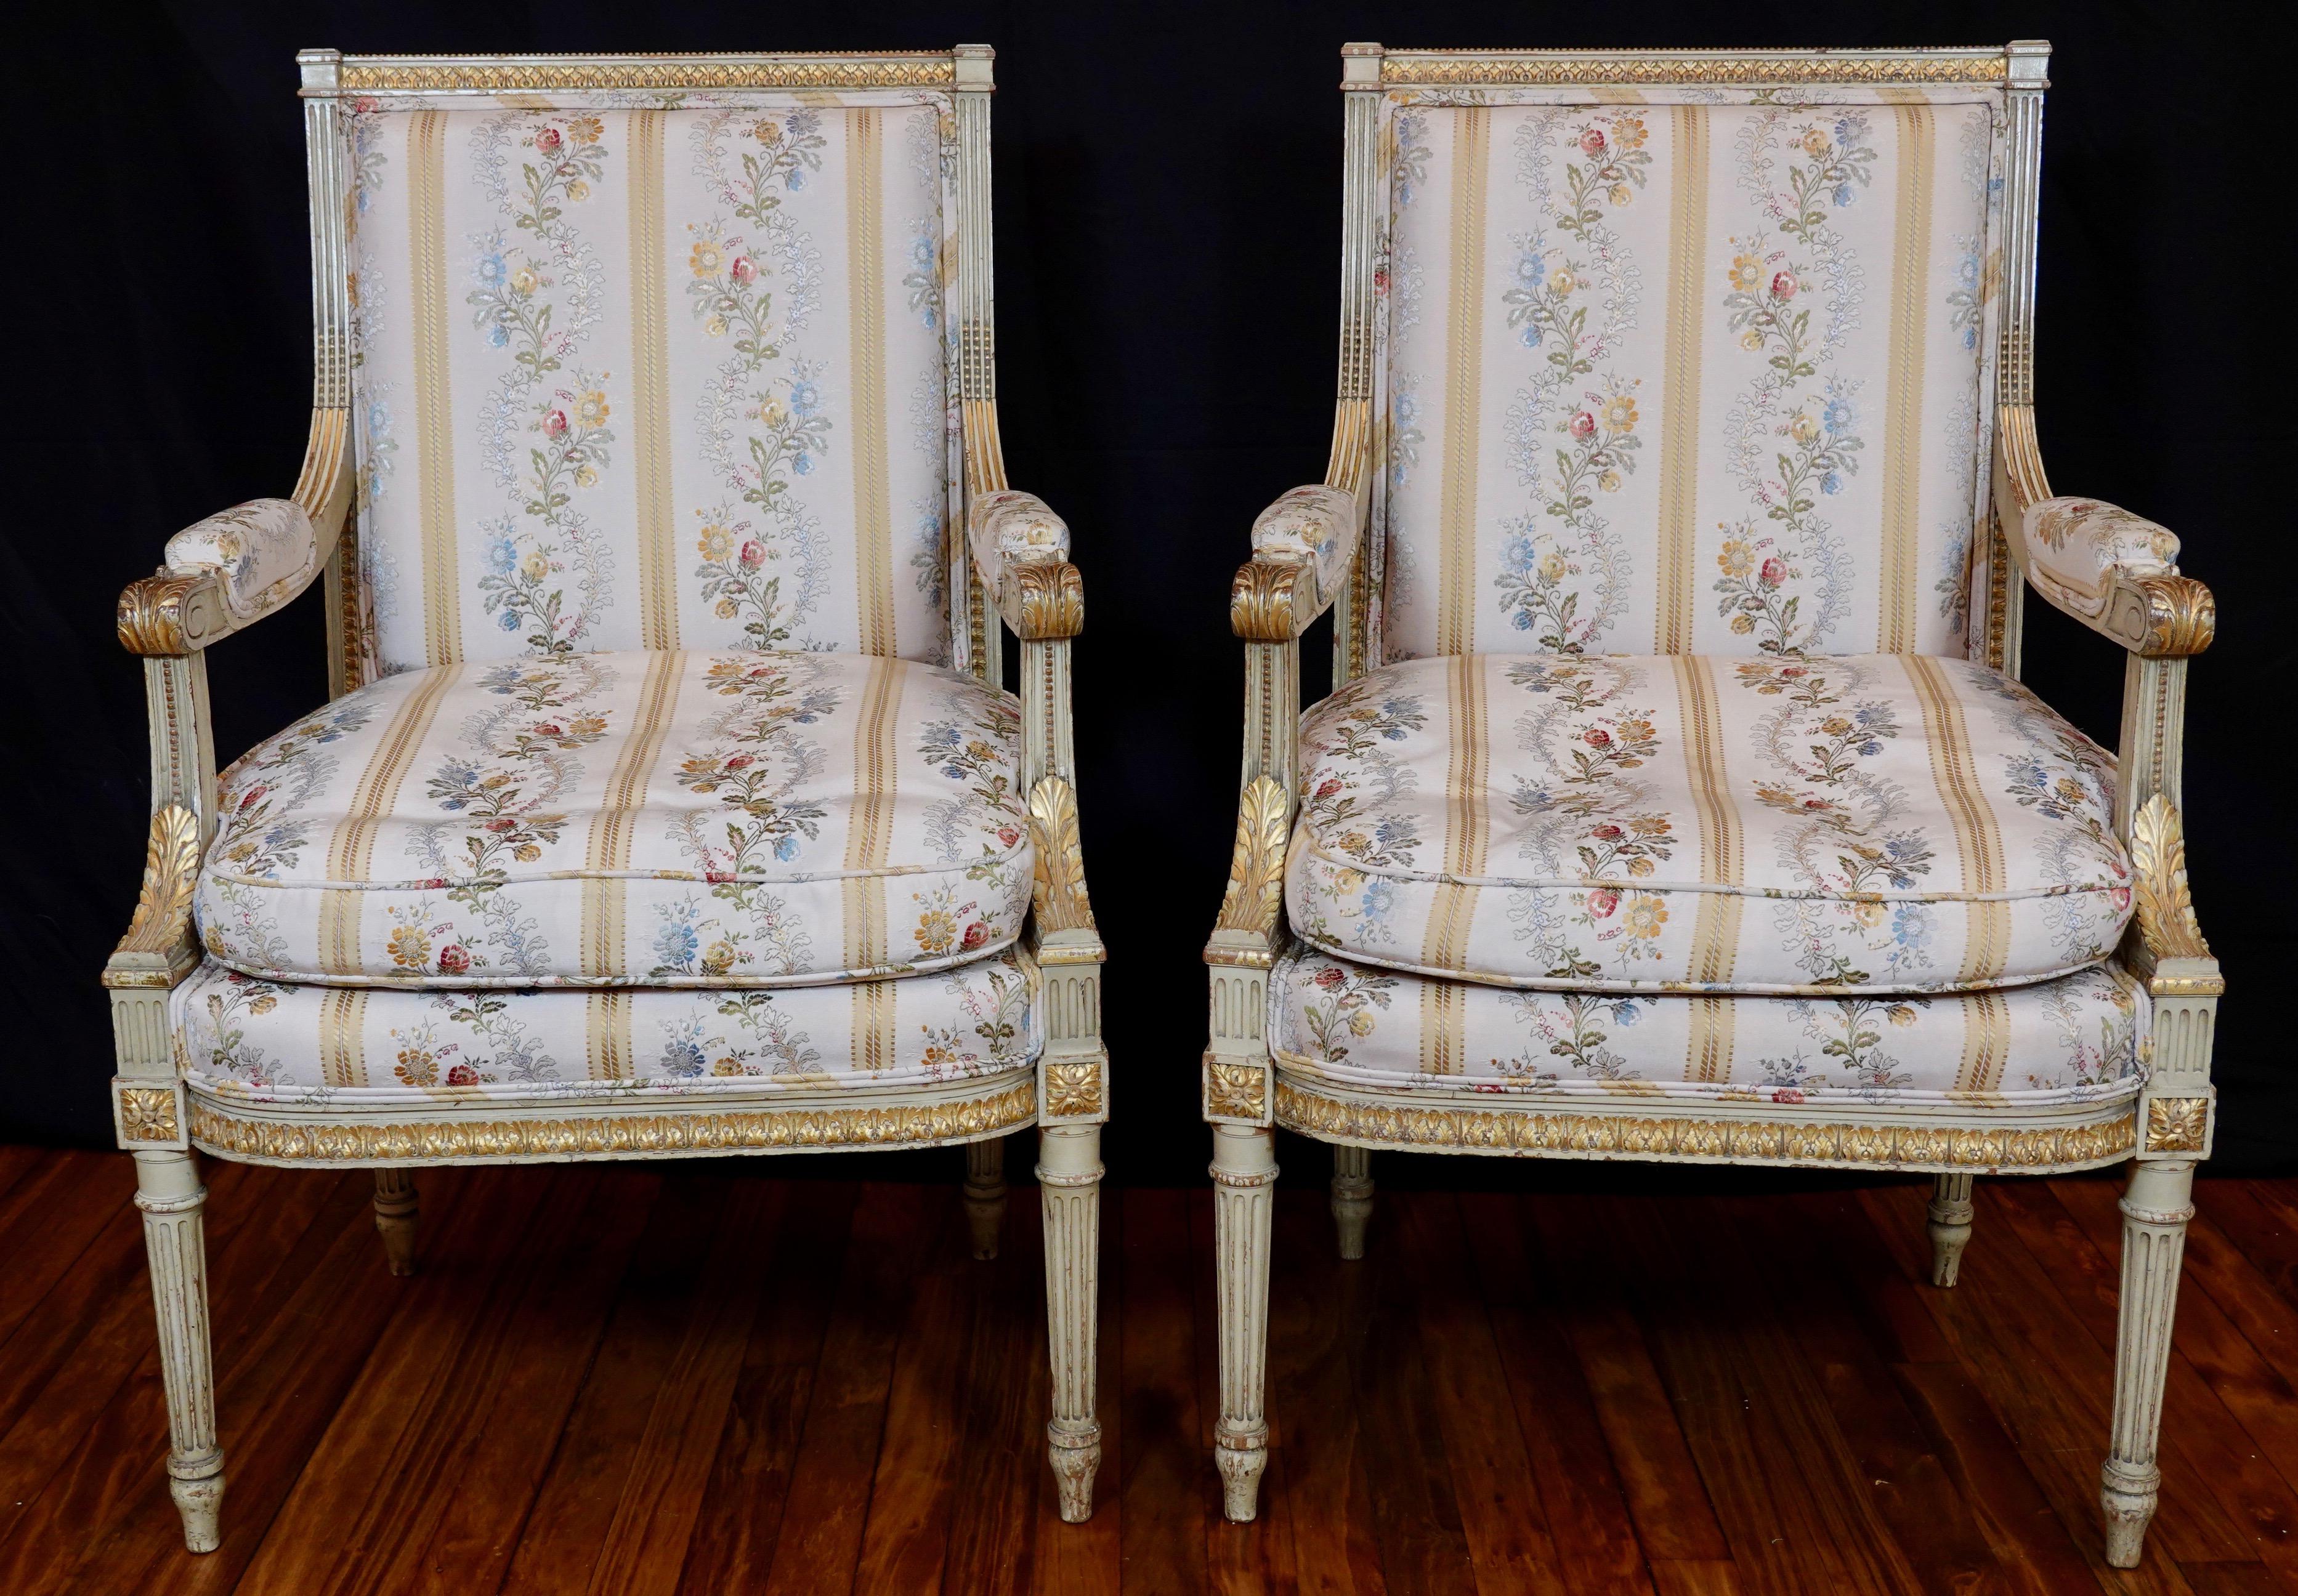 Pair of lovely Louis XVI style painted fauteuils with elegant silk lampas French fabric and double welt (early 20th century). The chairs are a light cream color with parcel gilt accents. Carved neoclassical ornaments include acanthus leaves, pearl